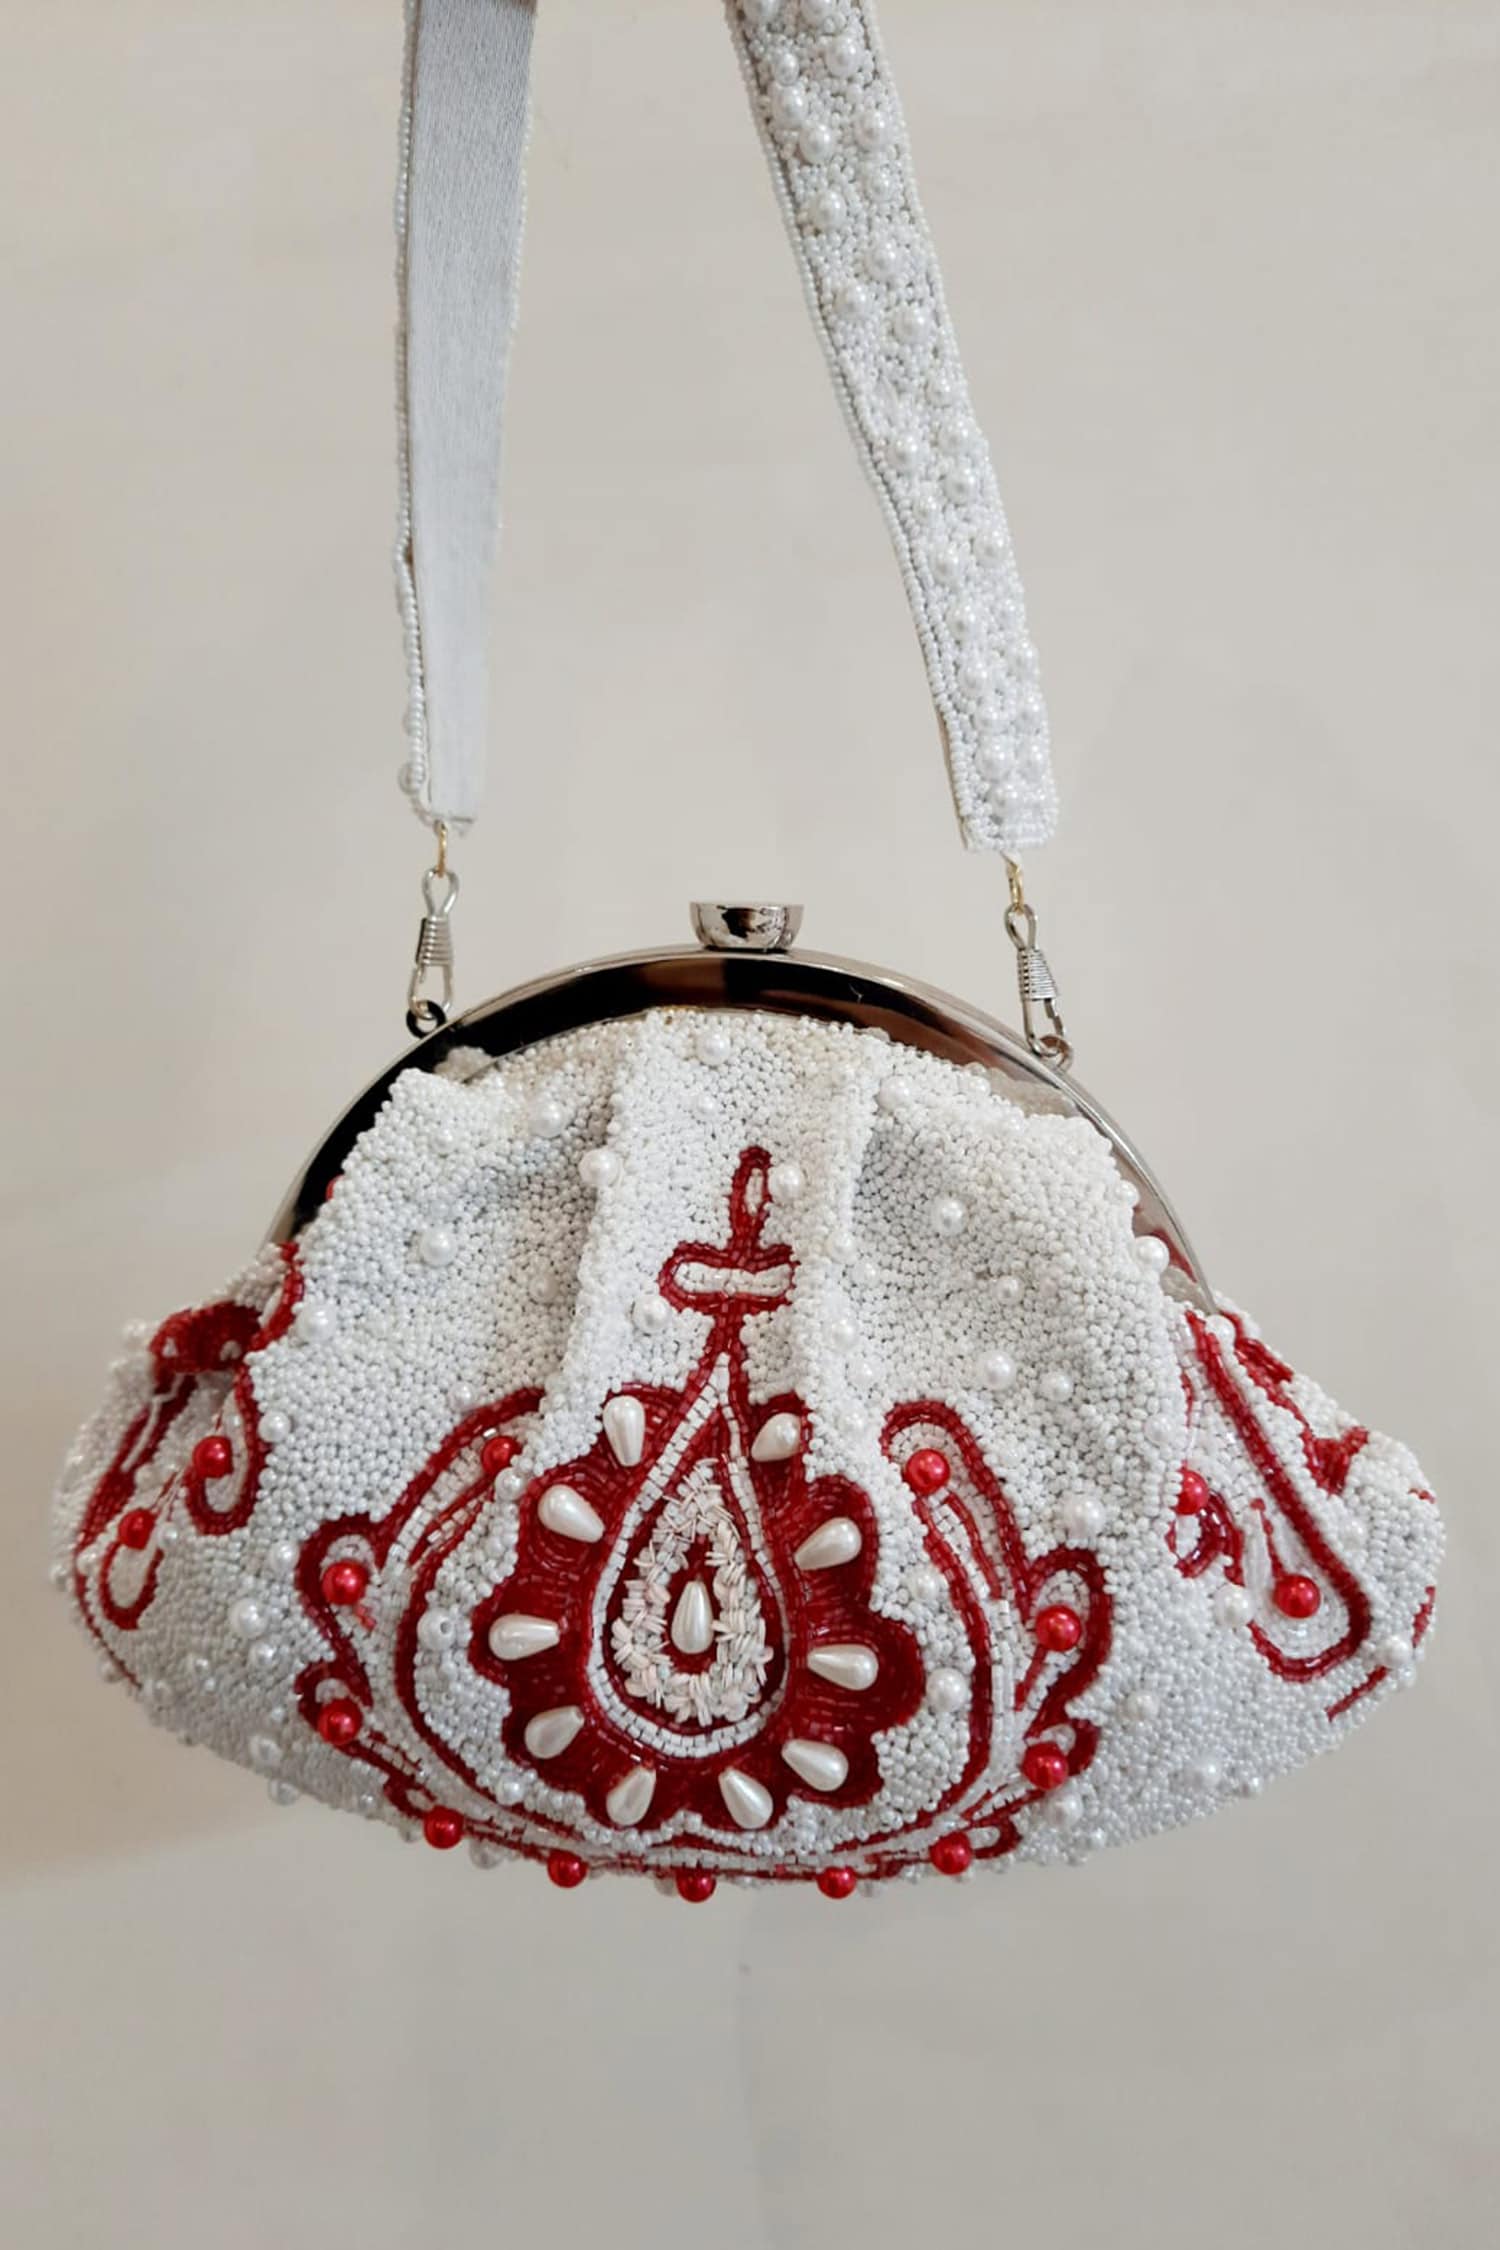 These embroidered purses and bags aim to empower women - Thebitbag